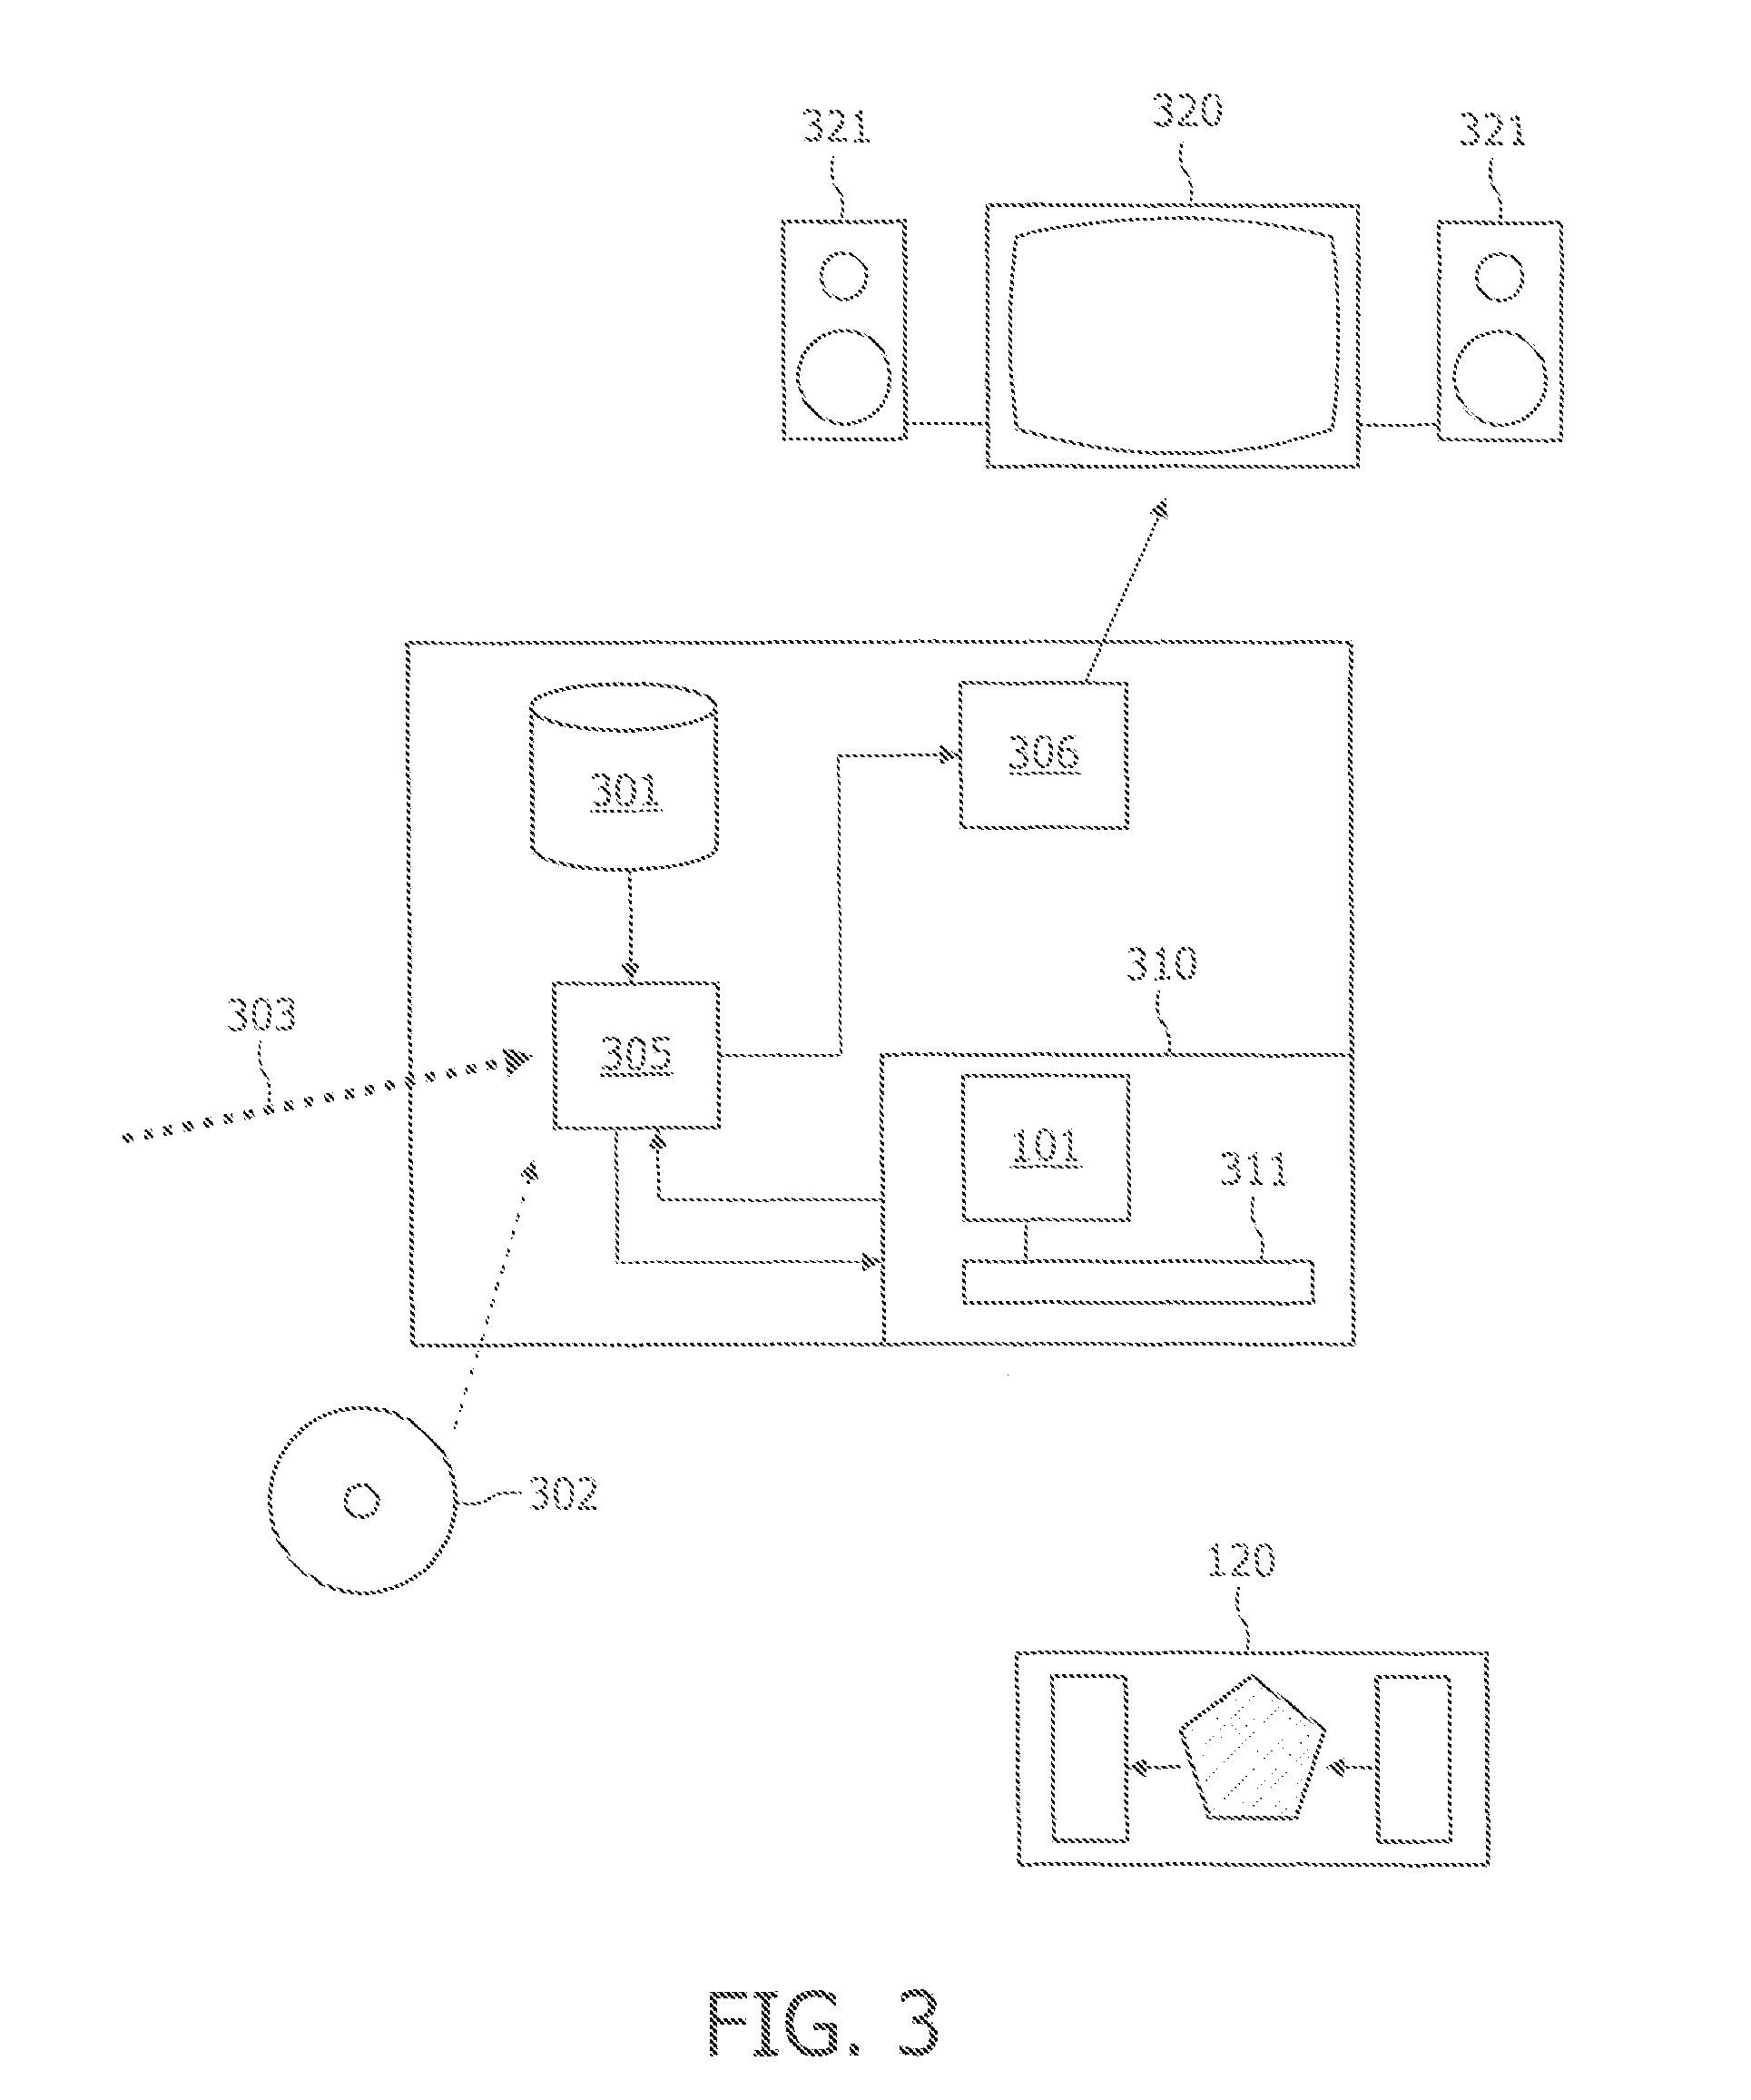 Method of generating arbitrary numbers given a seed